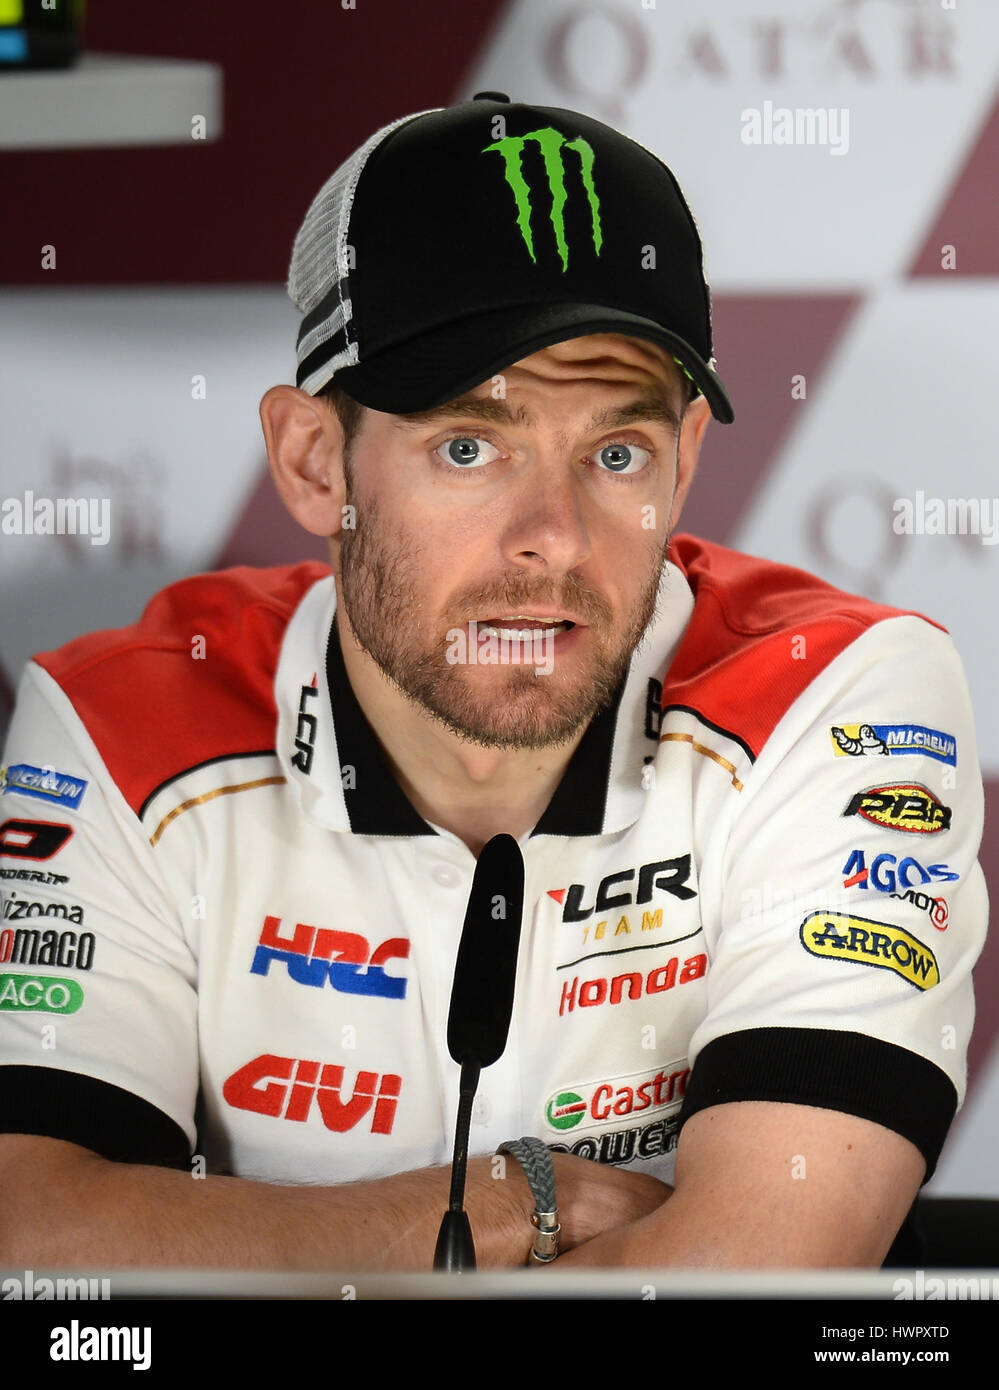 Doha. 22nd Mar, 2017. British rider Cal Crutchlow of LCR Honda speaks during a press conference at the Losail International Circuit in Qatar's capital Doha on March 22, 2017, ahead of Grand Prix of Qatar which will be held on March 26. Credit: Nikku/Xinhua/Alamy Live News Stock Photo